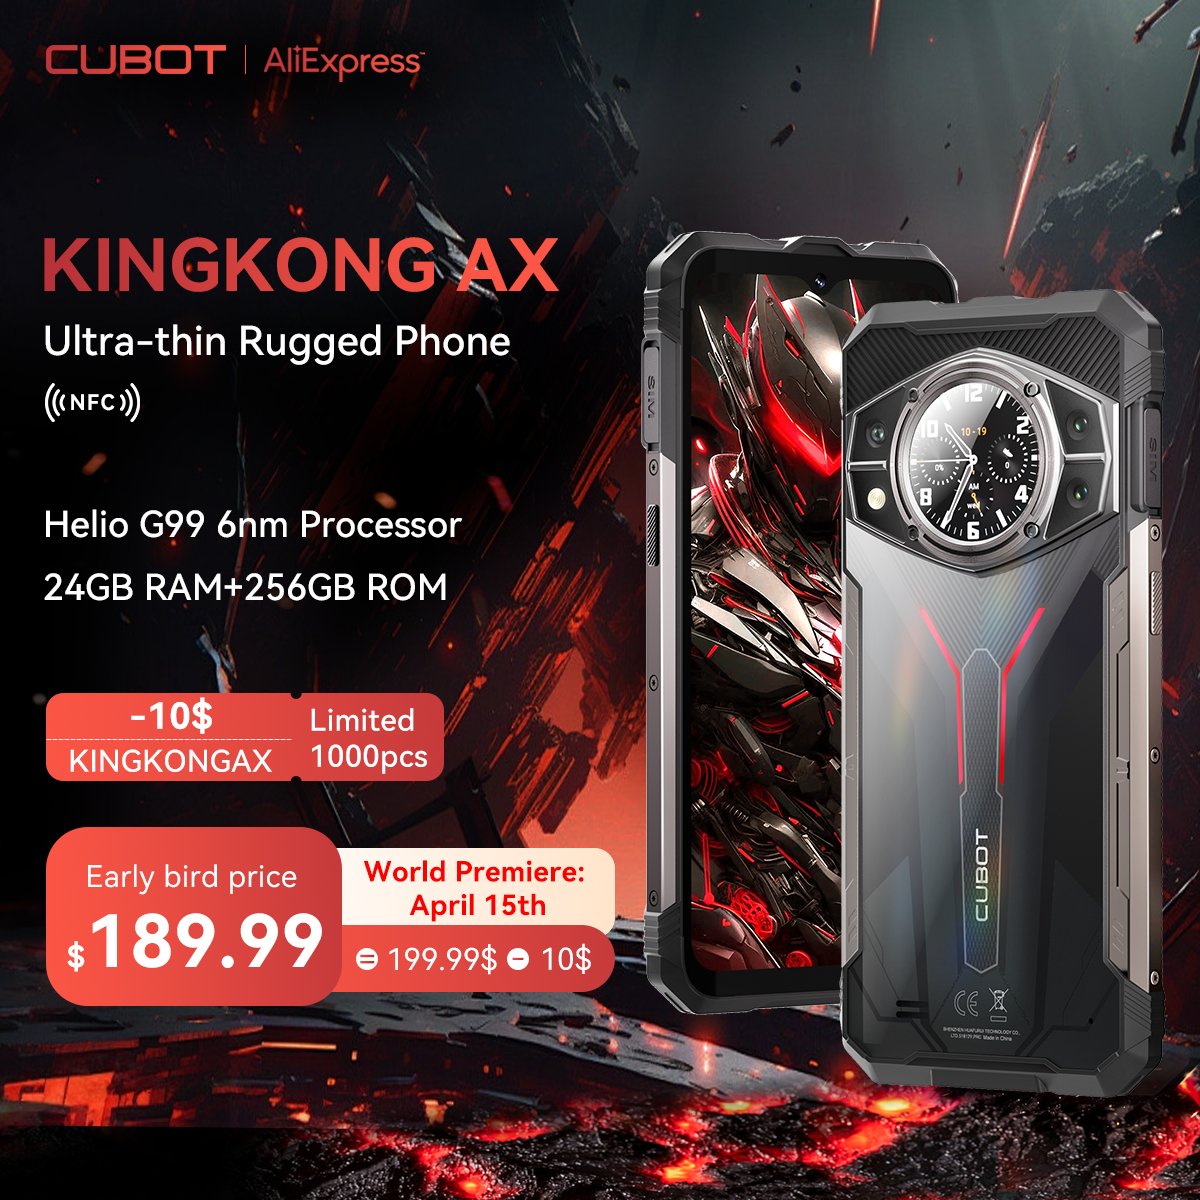 Witness the world premiere of #KingkongAX . Cubot Kingkong AX Only for $189.99 ⏰world premiere from April 15 to April 19 🔗Buy now: s.click.aliexpress.com/e/_olljjdC 🎁Join the giveaway: bit.ly/4acRgi7